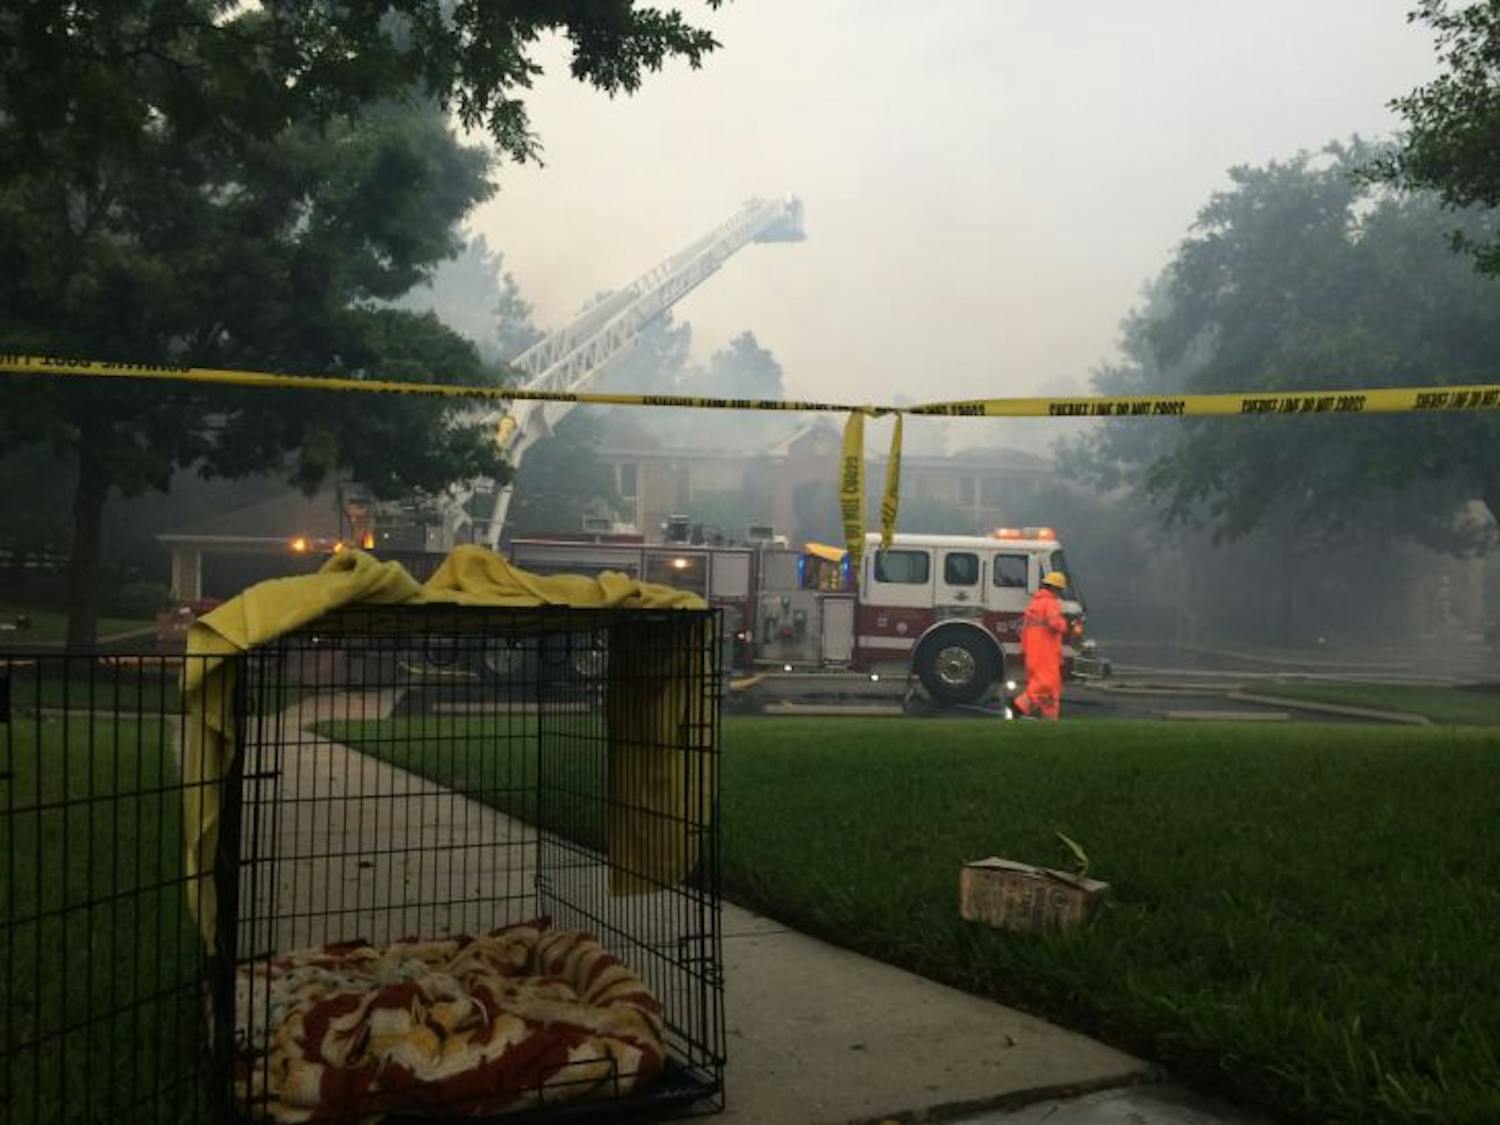 All 16 residents and their pets were reportedly unharmed in the fire.